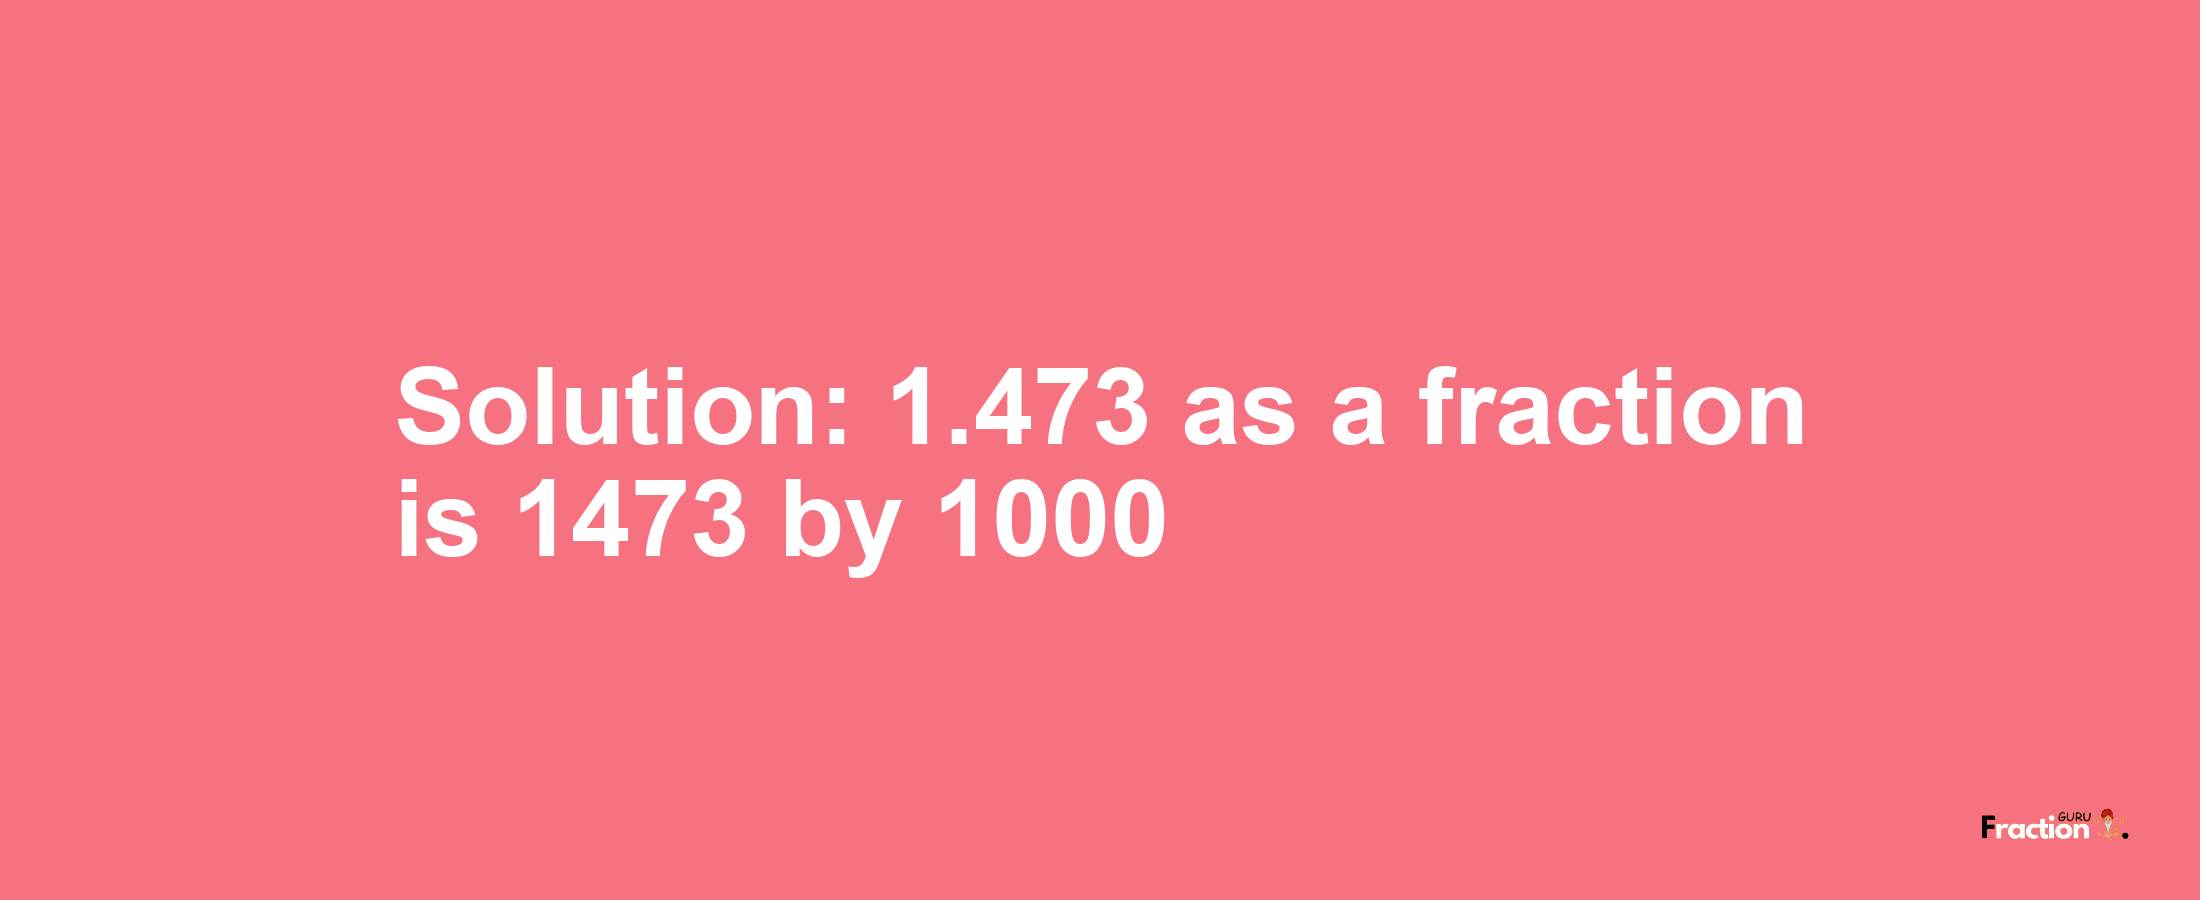 Solution:1.473 as a fraction is 1473/1000